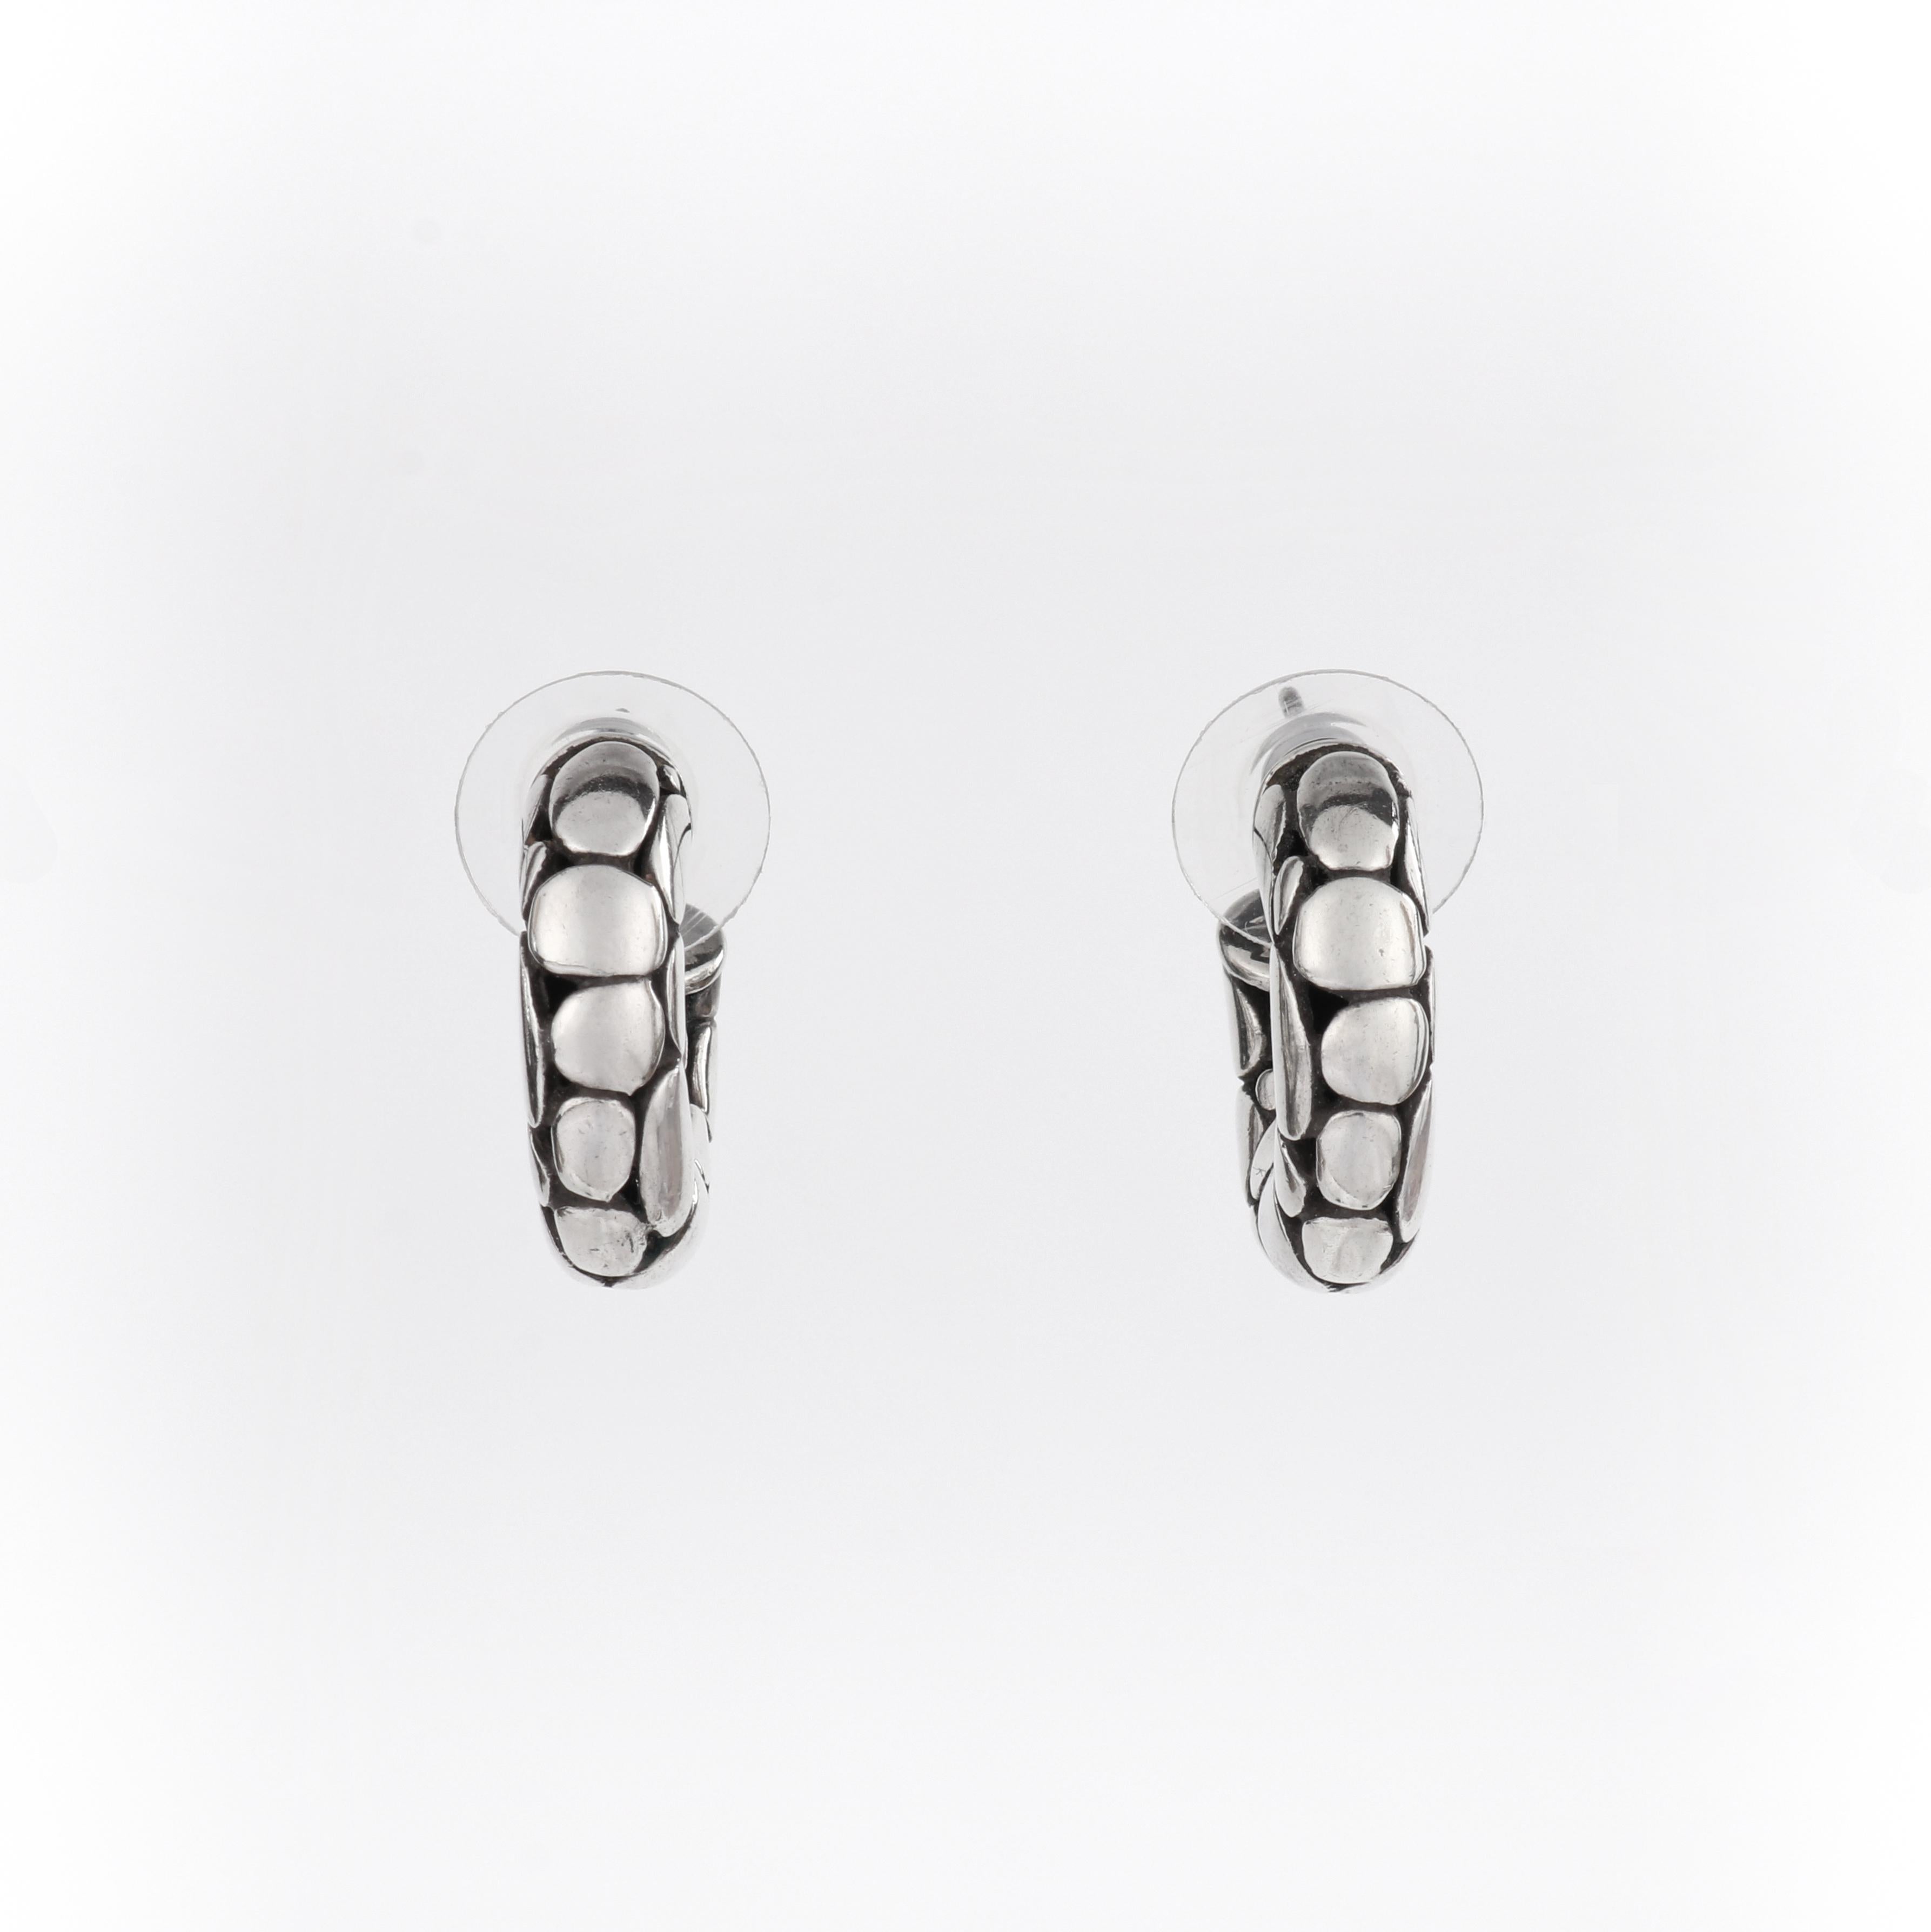 JOHN HARDY “Kali” Sterling Silver Carved Pebble Dot Small Hoop Earrings w/Box
 
Estimated Retail: $450.00
 
Brand / Manufacturer: John Hardy
Collection: “Kali” Collection
Style: Small hoop earrings
Color(s): Silver, black
Marked Material: “925”